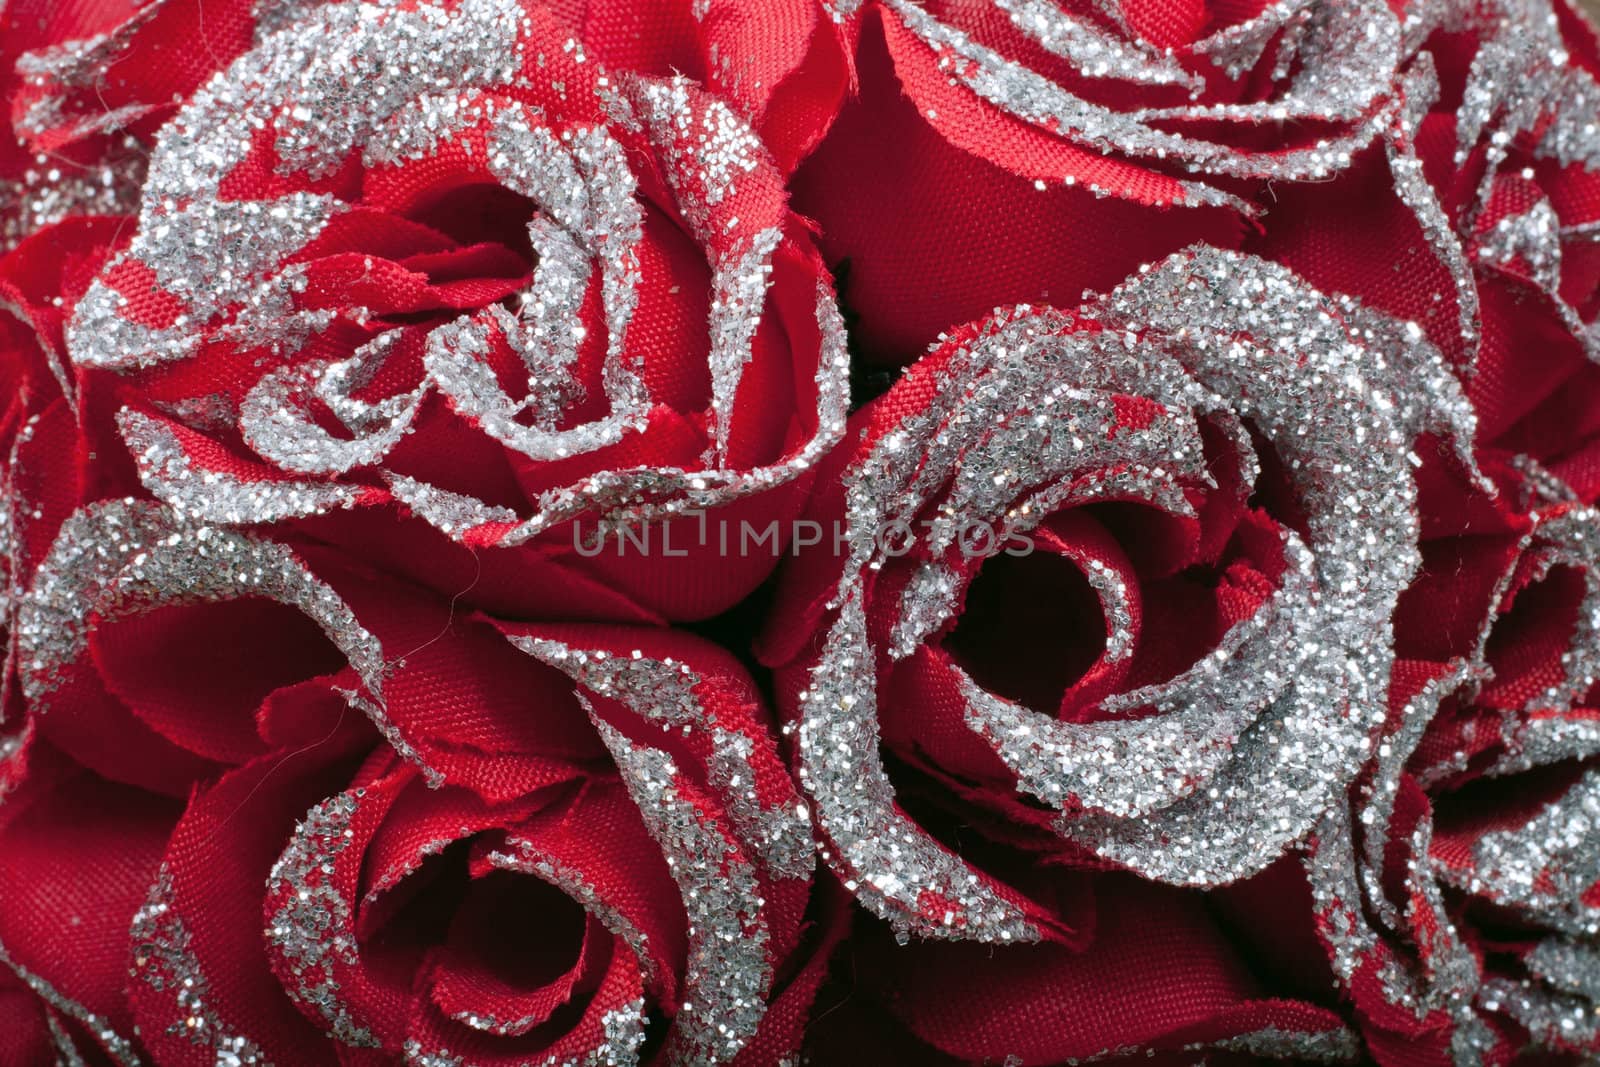 Red Roses with silver sparklefor Valentines Day